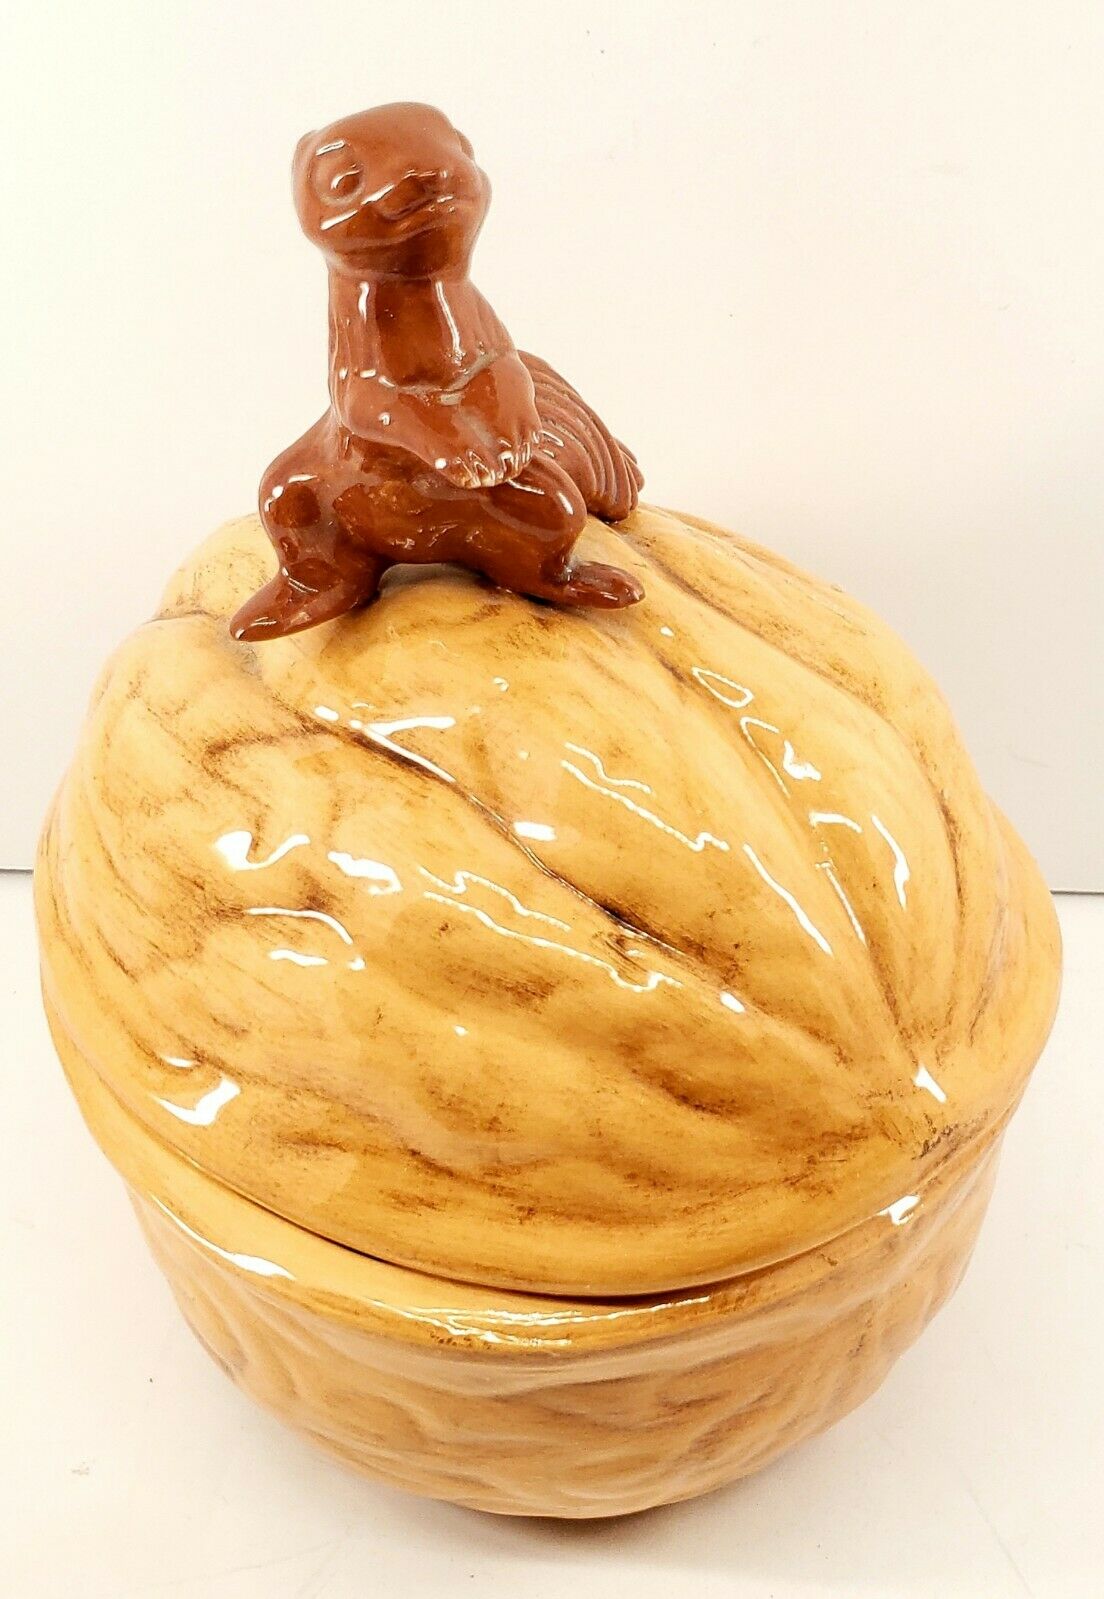 Vintage Ceramic Walnut Shaped Candy Or Nut Dish With Squirrel Handle